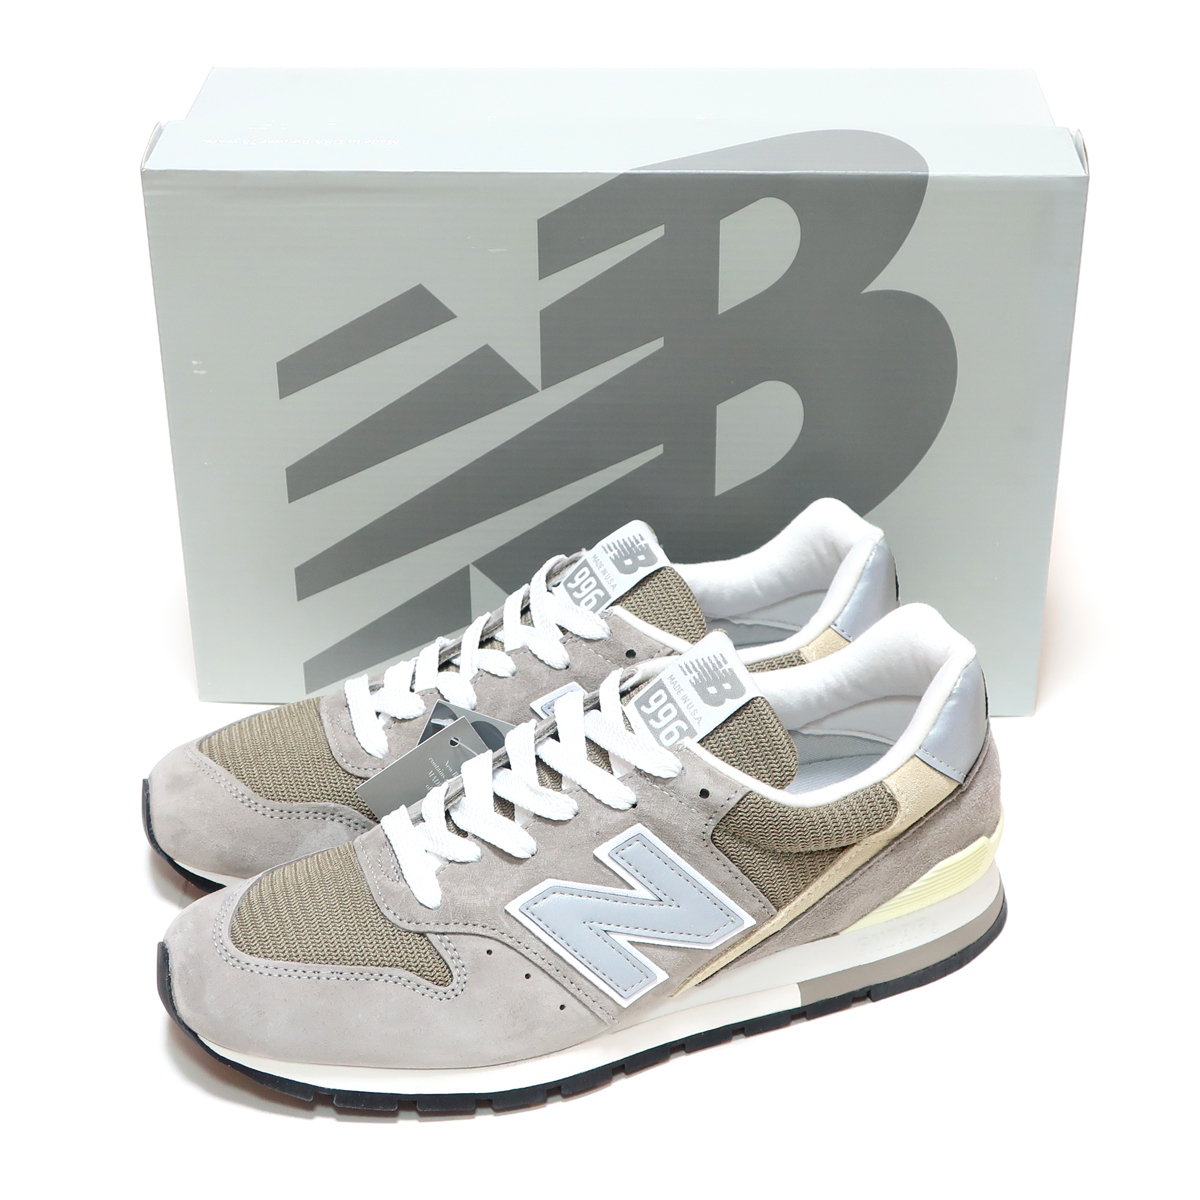 NEW BALANCE U996GR GRAY GREY SUEDE MADE IN USA US8 26cm ( ニューバランス 996 グレー スエード アメリカ製 )